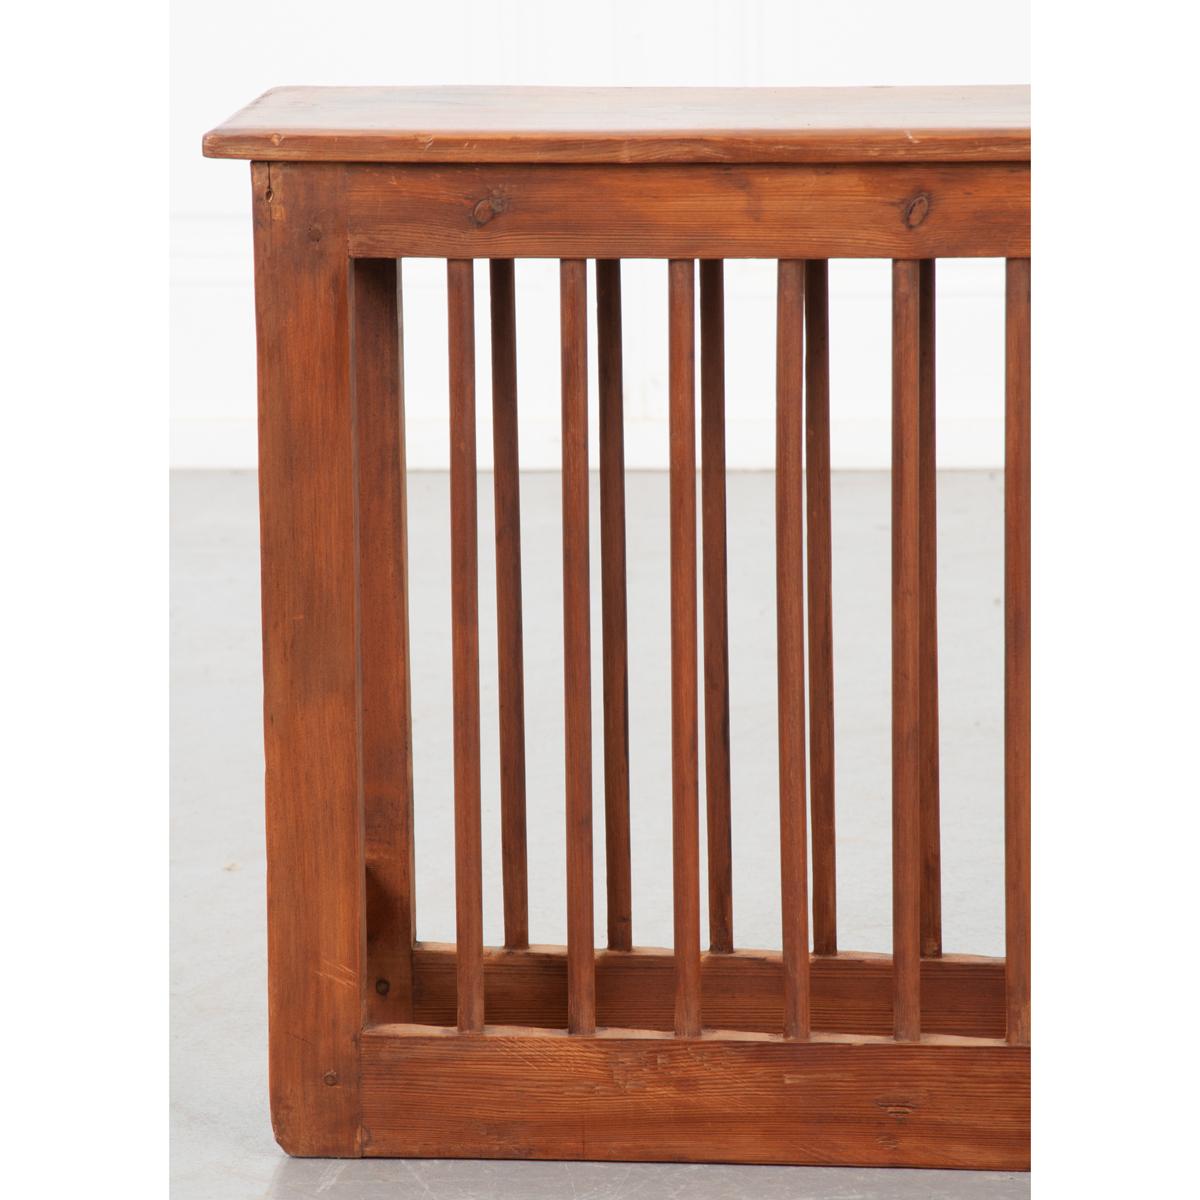 This simple wooden plate holder is the functional piece of antique organization you’ve been searching for. You’ll have a much easier time accessing, storing, and drying your plates with this piece. The wood itself is in great condition and level so